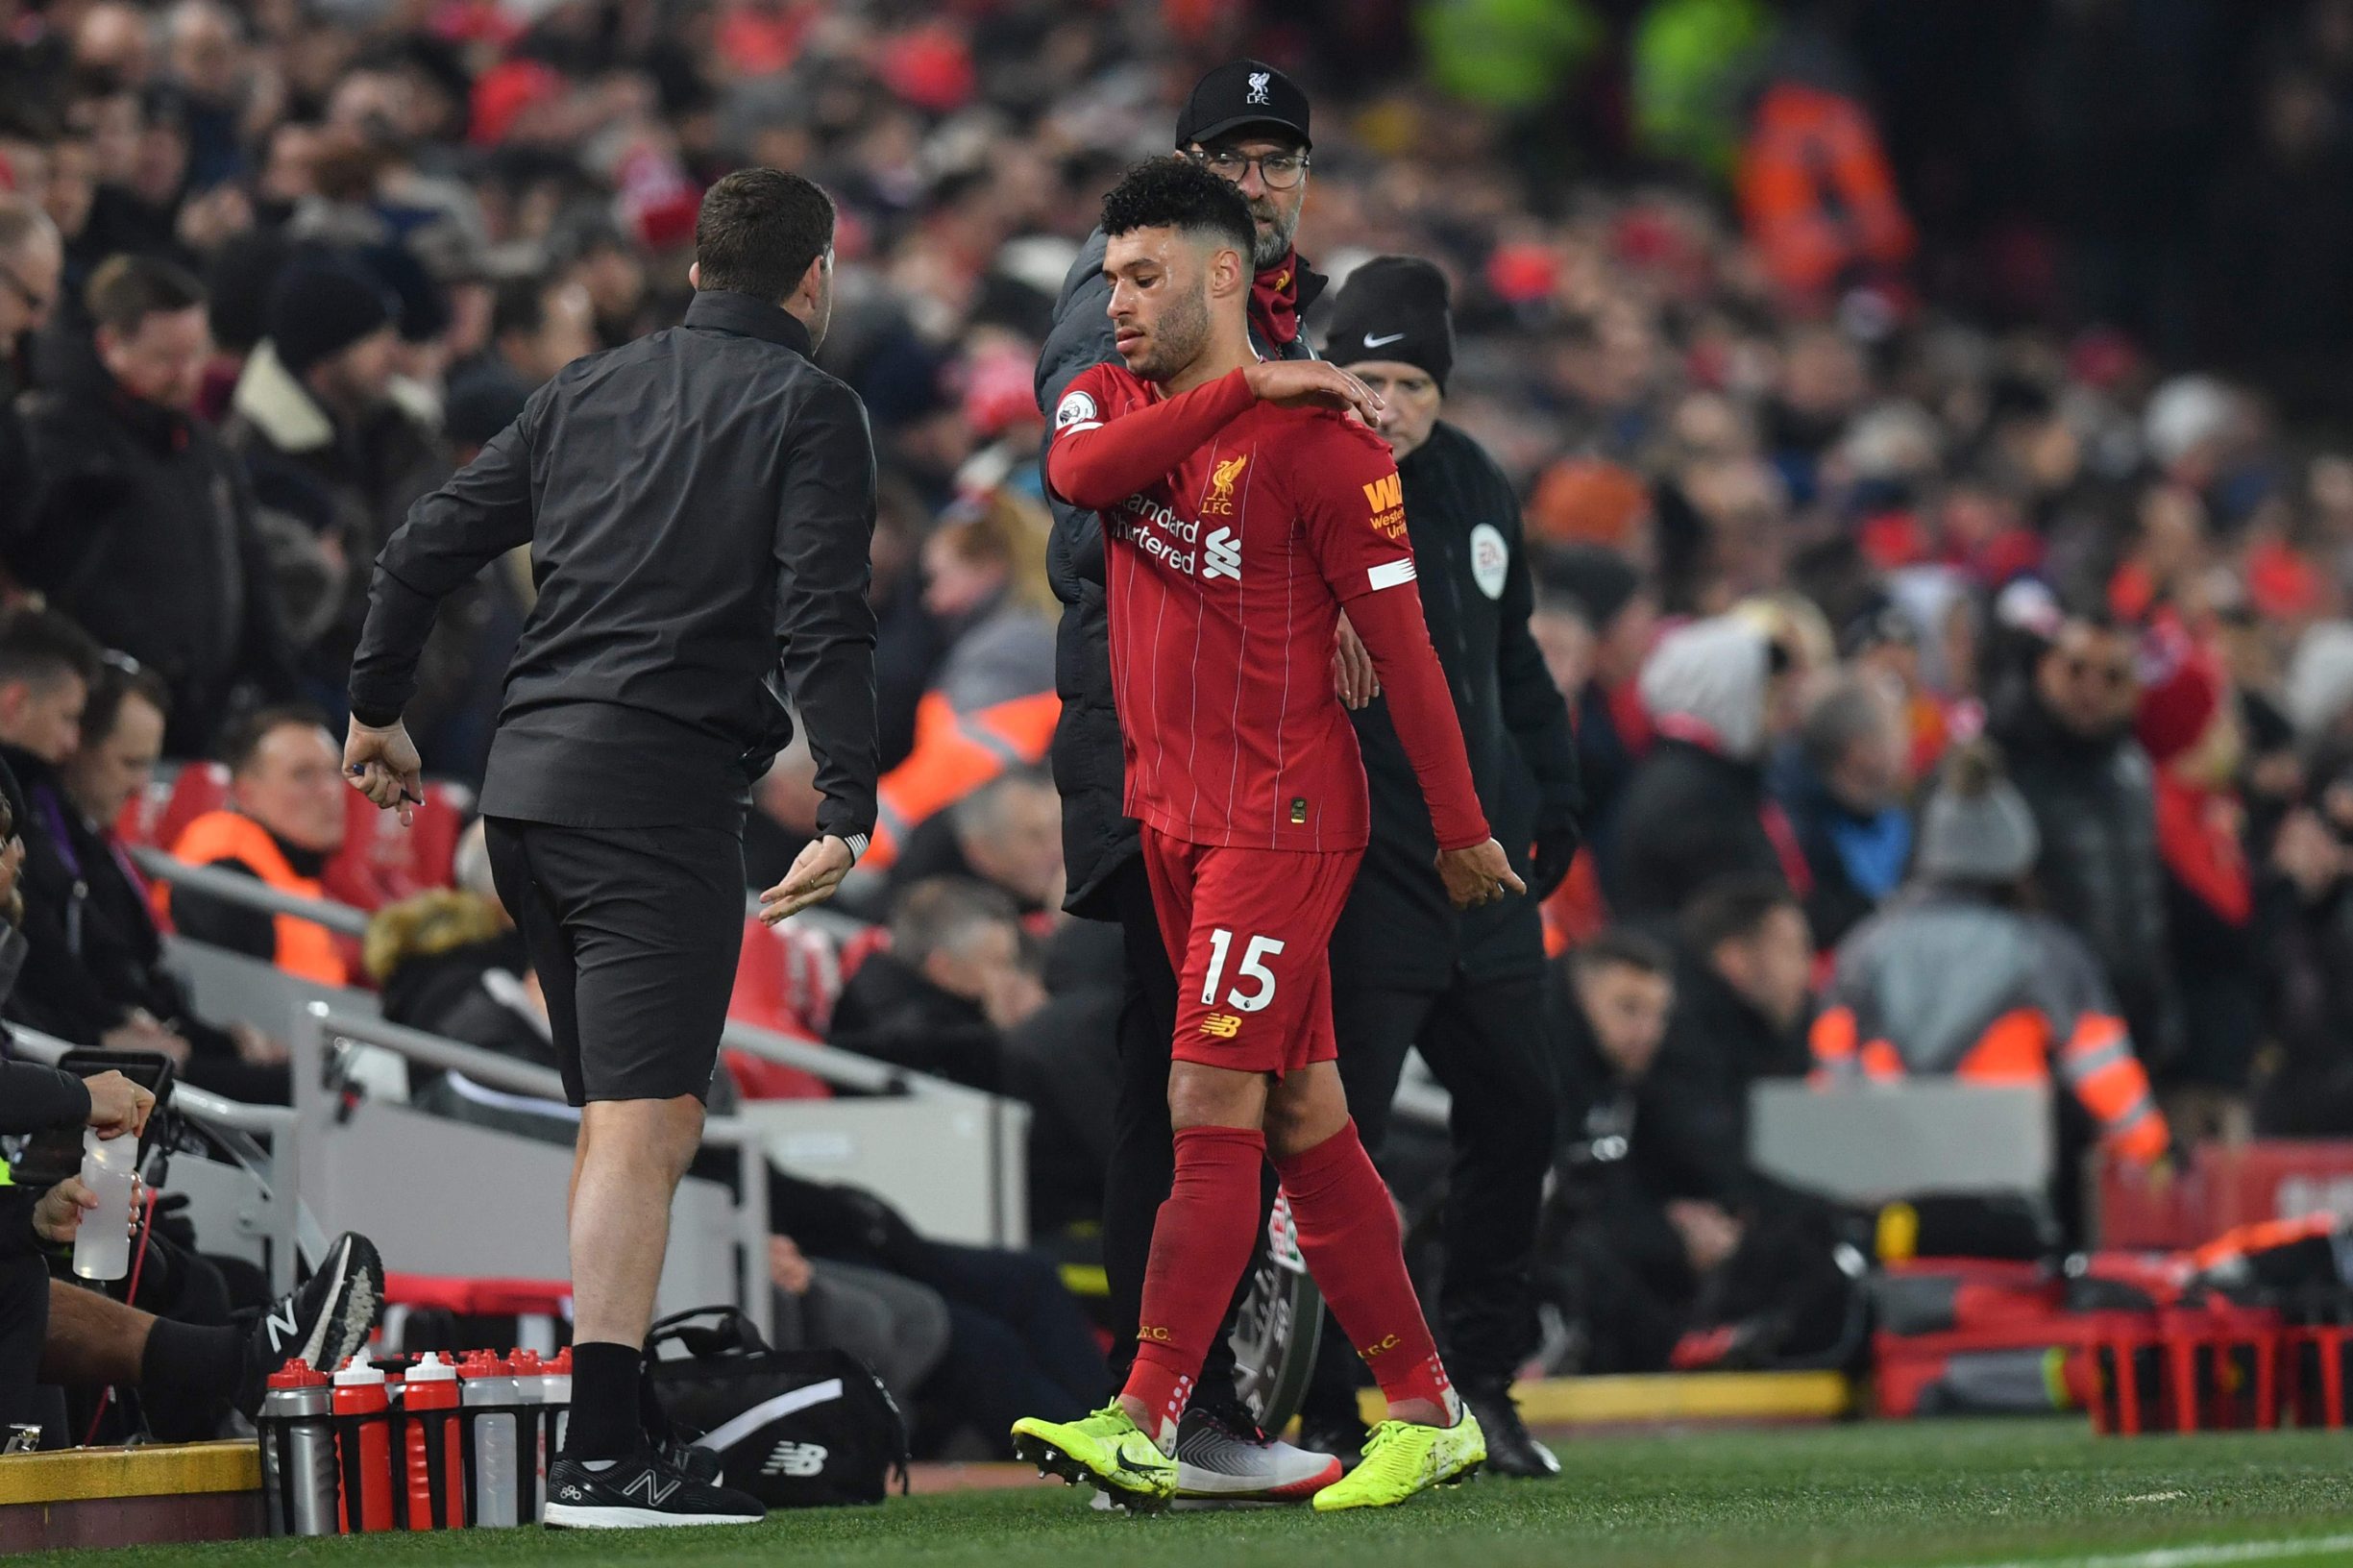 Liverpool's English midfielder Alex Oxlade-Chamberlain reacts as he leaves the pitch substituted during the English Premier League football match between Liverpool and Manchester United at Anfield stadium in Liverpool, north west England on January 19, 2020. (Photo by Paul ELLIS / AFP) / RESTRICTED TO EDITORIAL USE. No use with unauthorized audio, video, data, fixture lists, club/league logos or 'live' services. Online in-match use limited to 120 images. An additional 40 images may be used in extra time. No video emulation. Social media in-match use limited to 120 images. An additional 40 images may be used in extra time. No use in betting publications, games or single club/league/player publications. / 